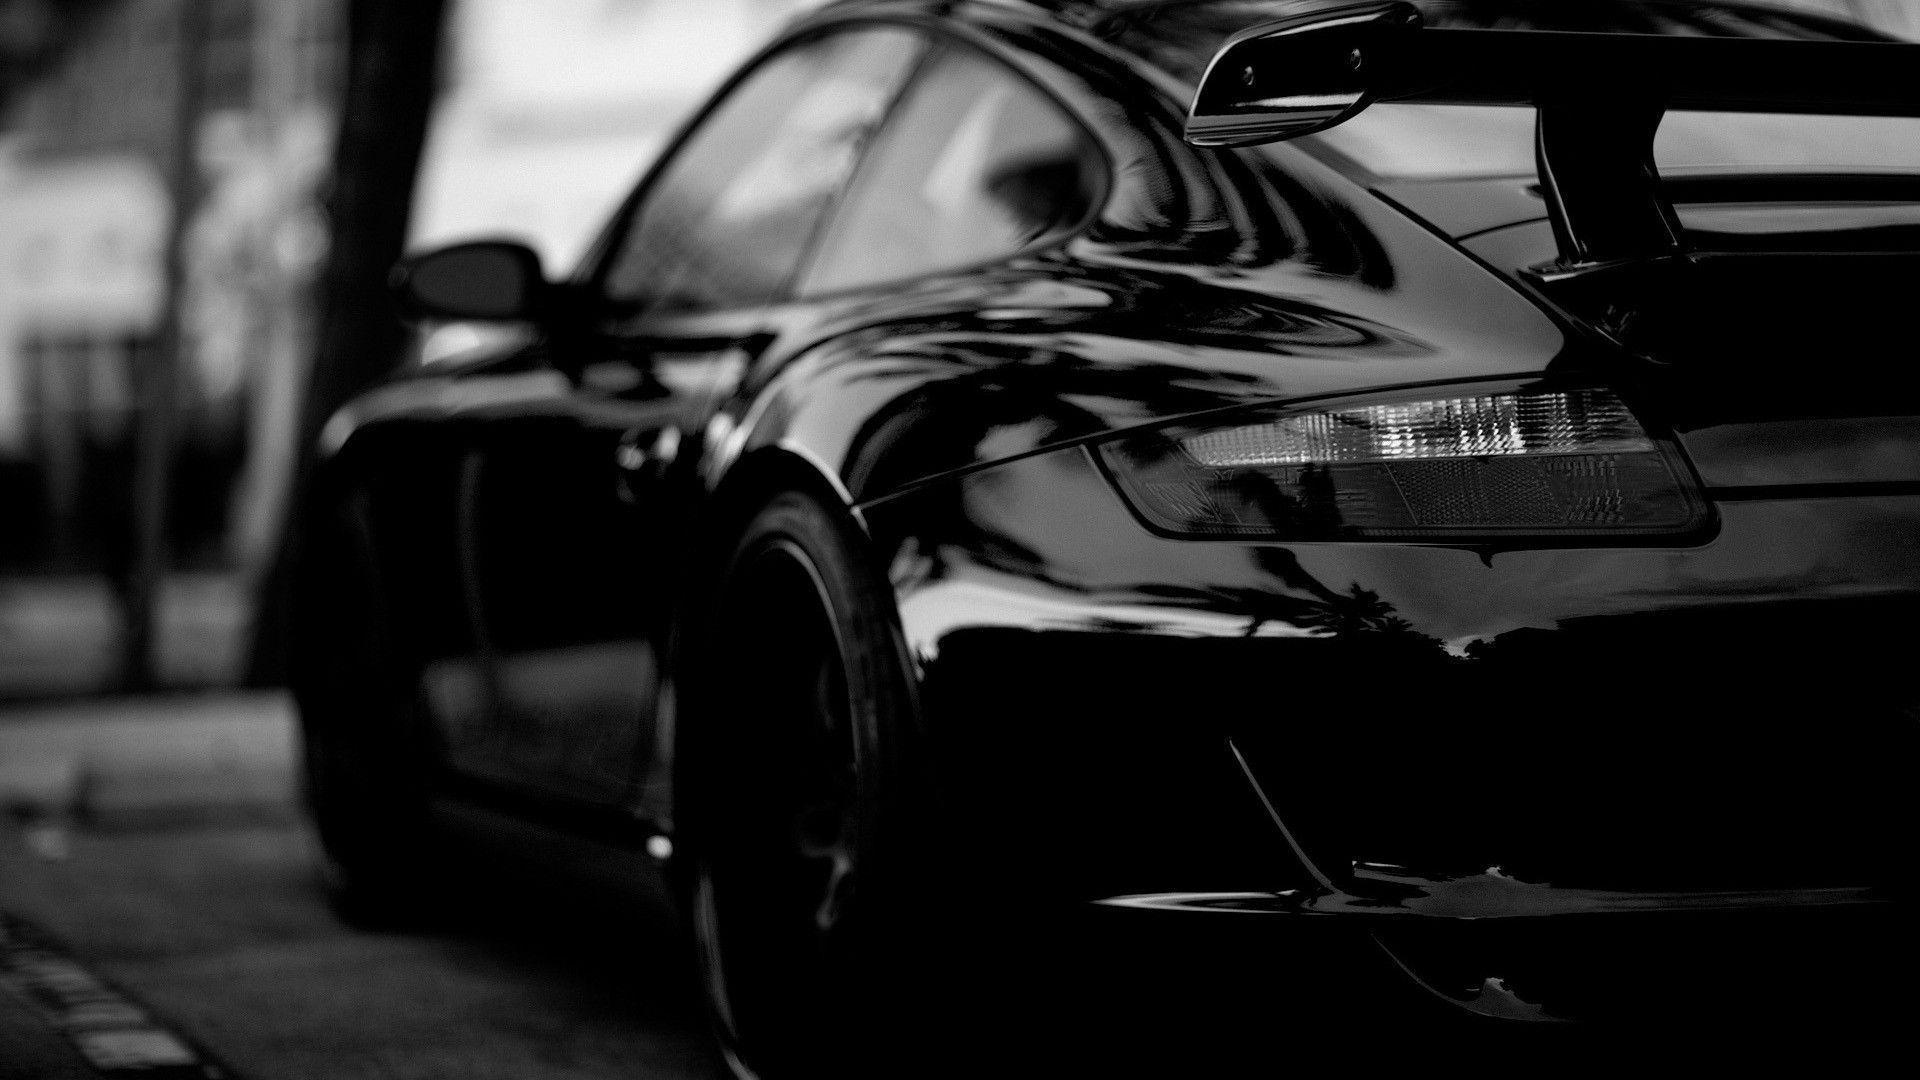 Black And White Hd Wallpapers Car Pictures 17427 Full HD Wallpapers